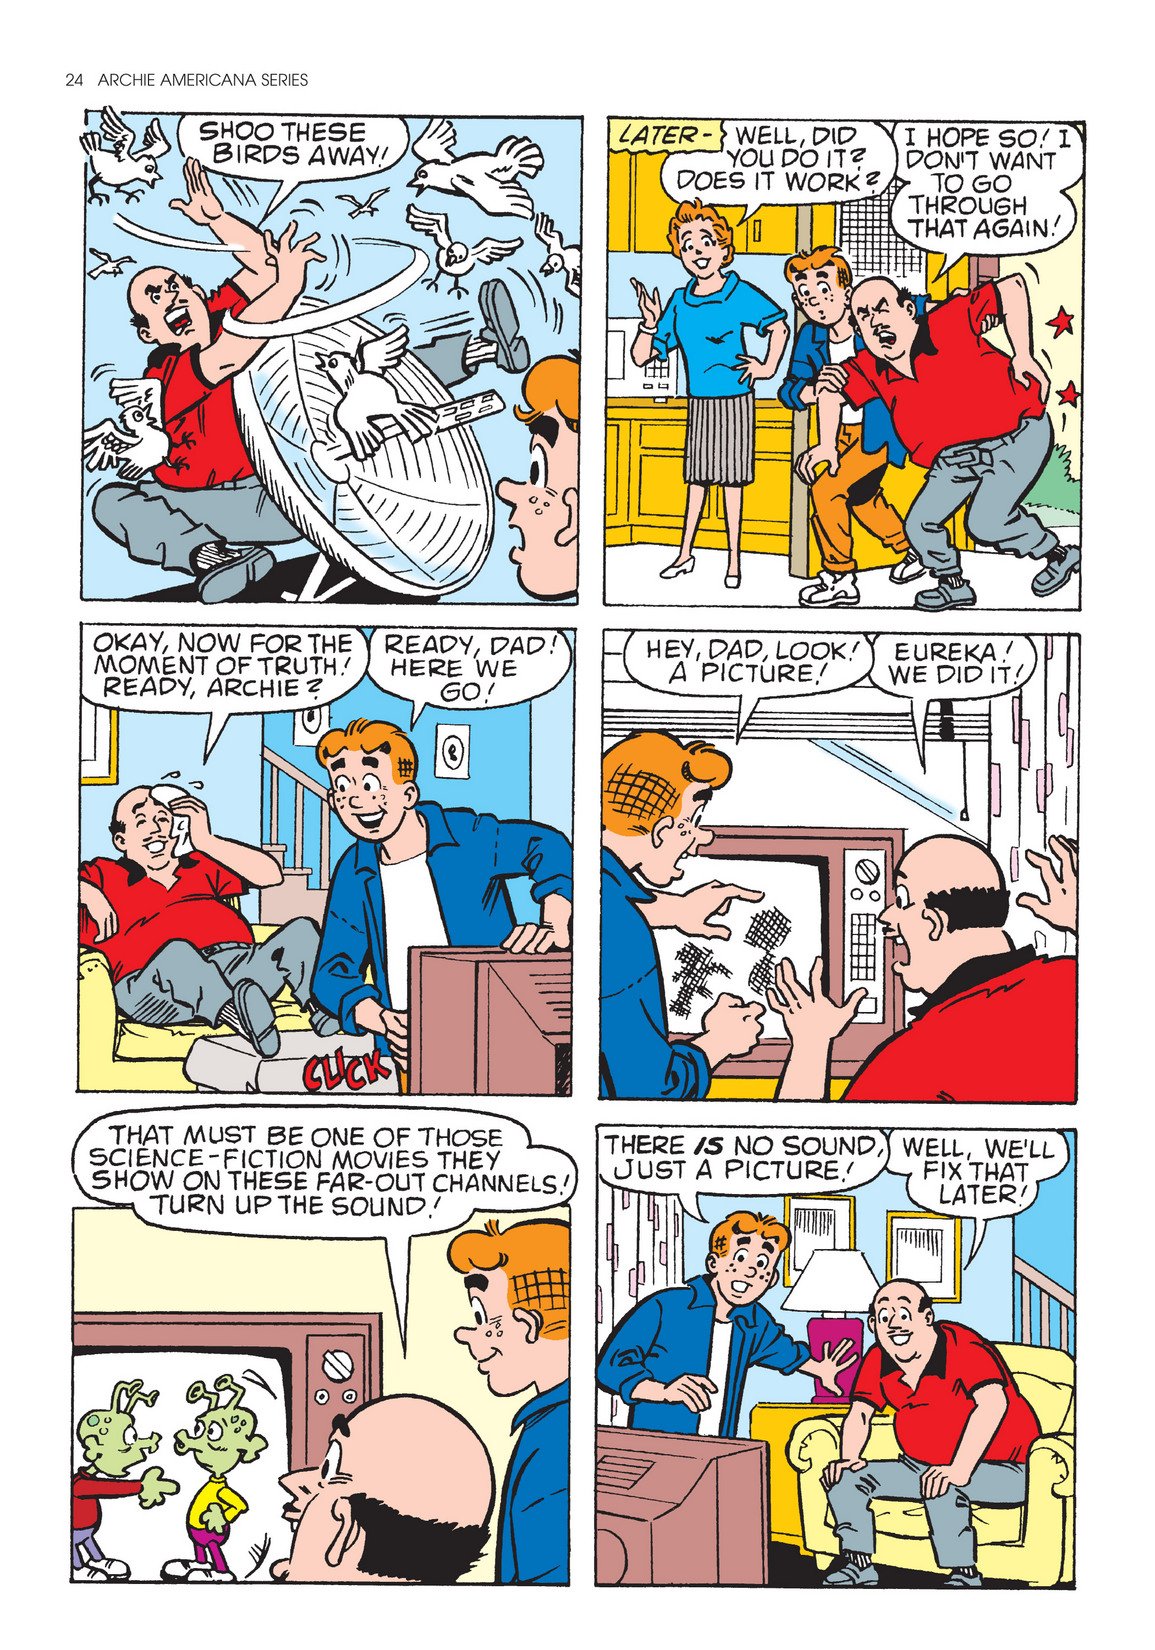 Read online Archie Americana Series comic -  Issue # TPB 9 - 26